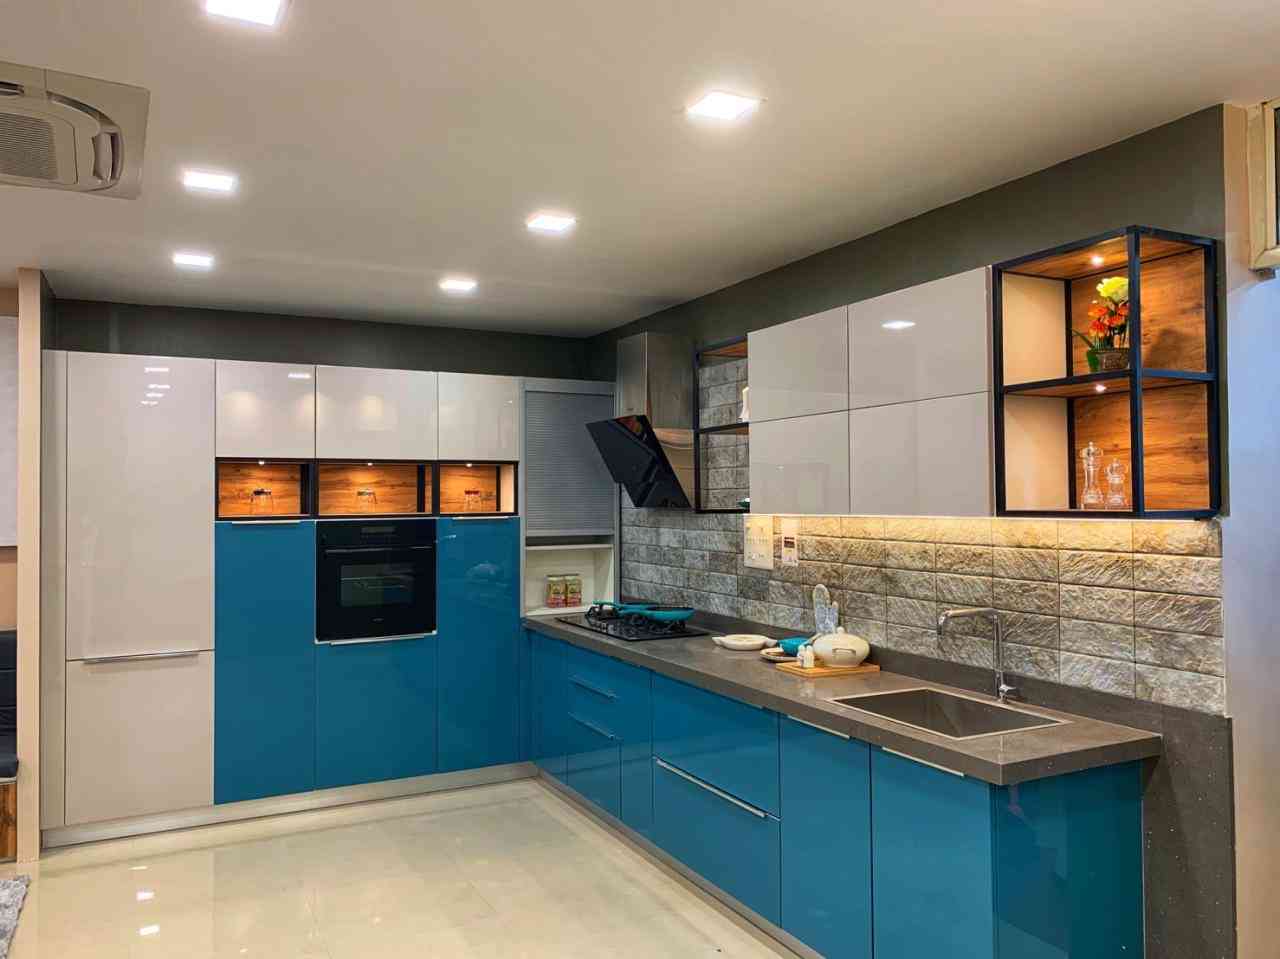 Modular L-Shaped Kitchen Design With Blue And White Cabinets